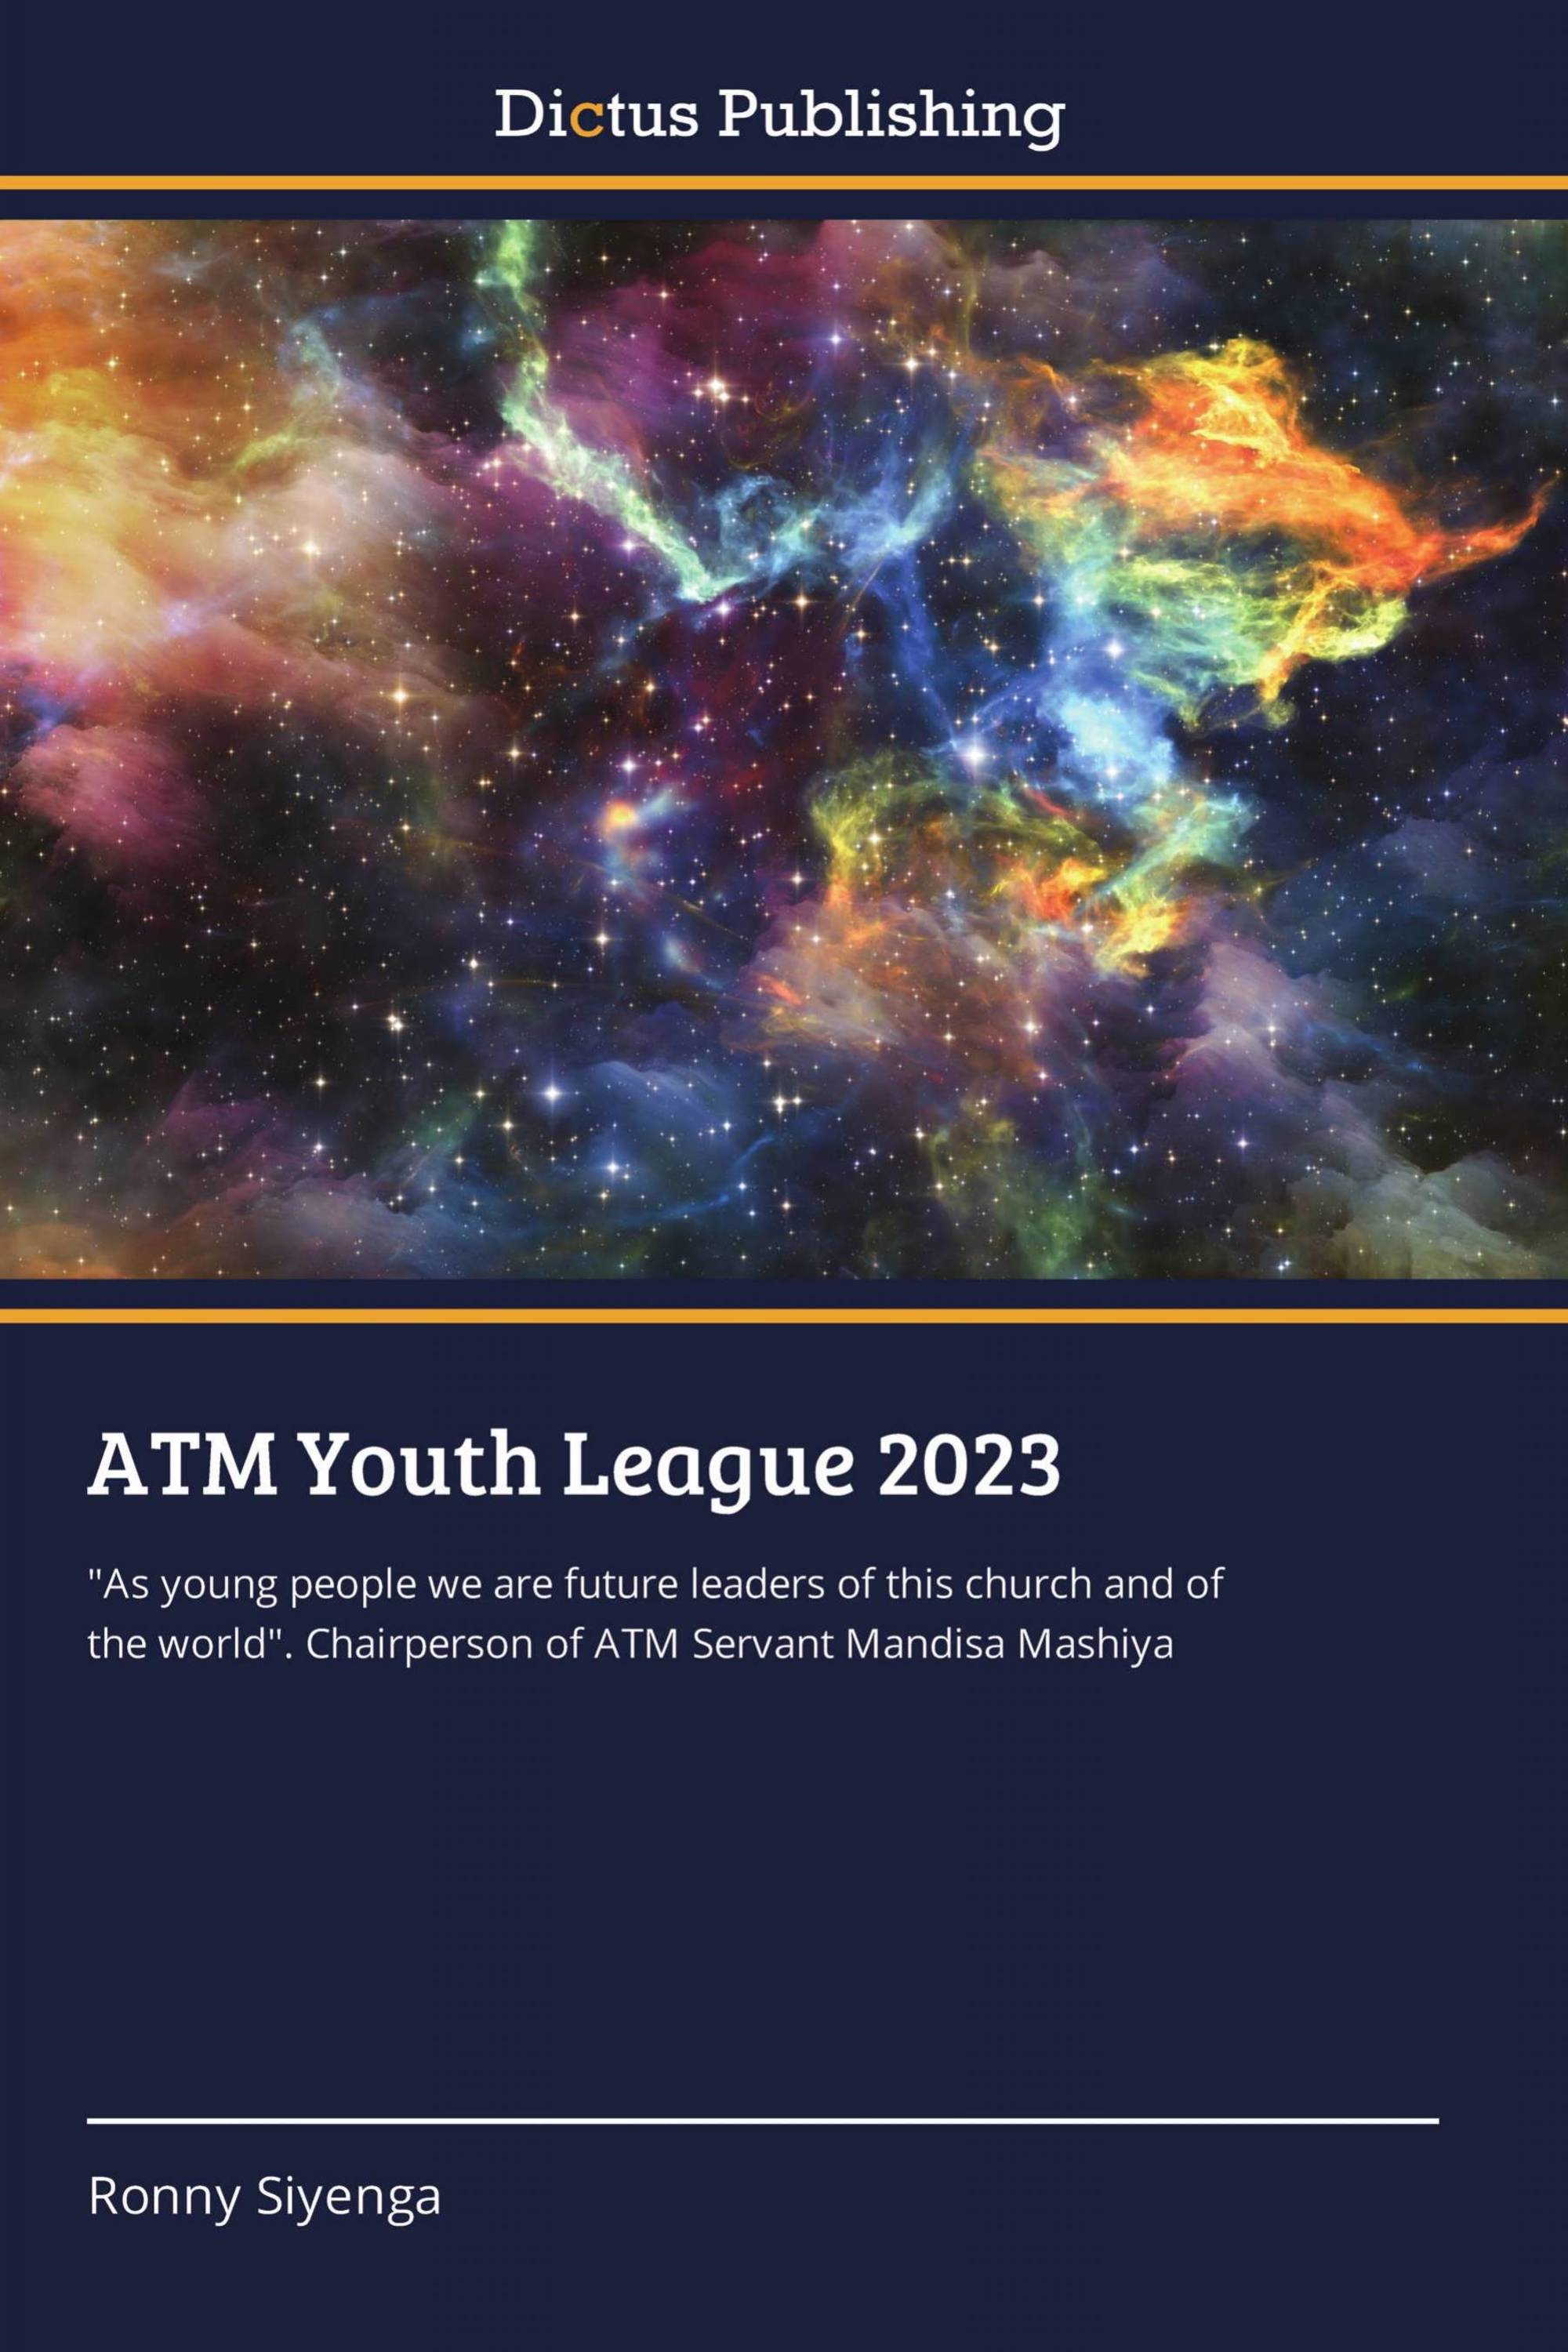 ATM Youth League 2023